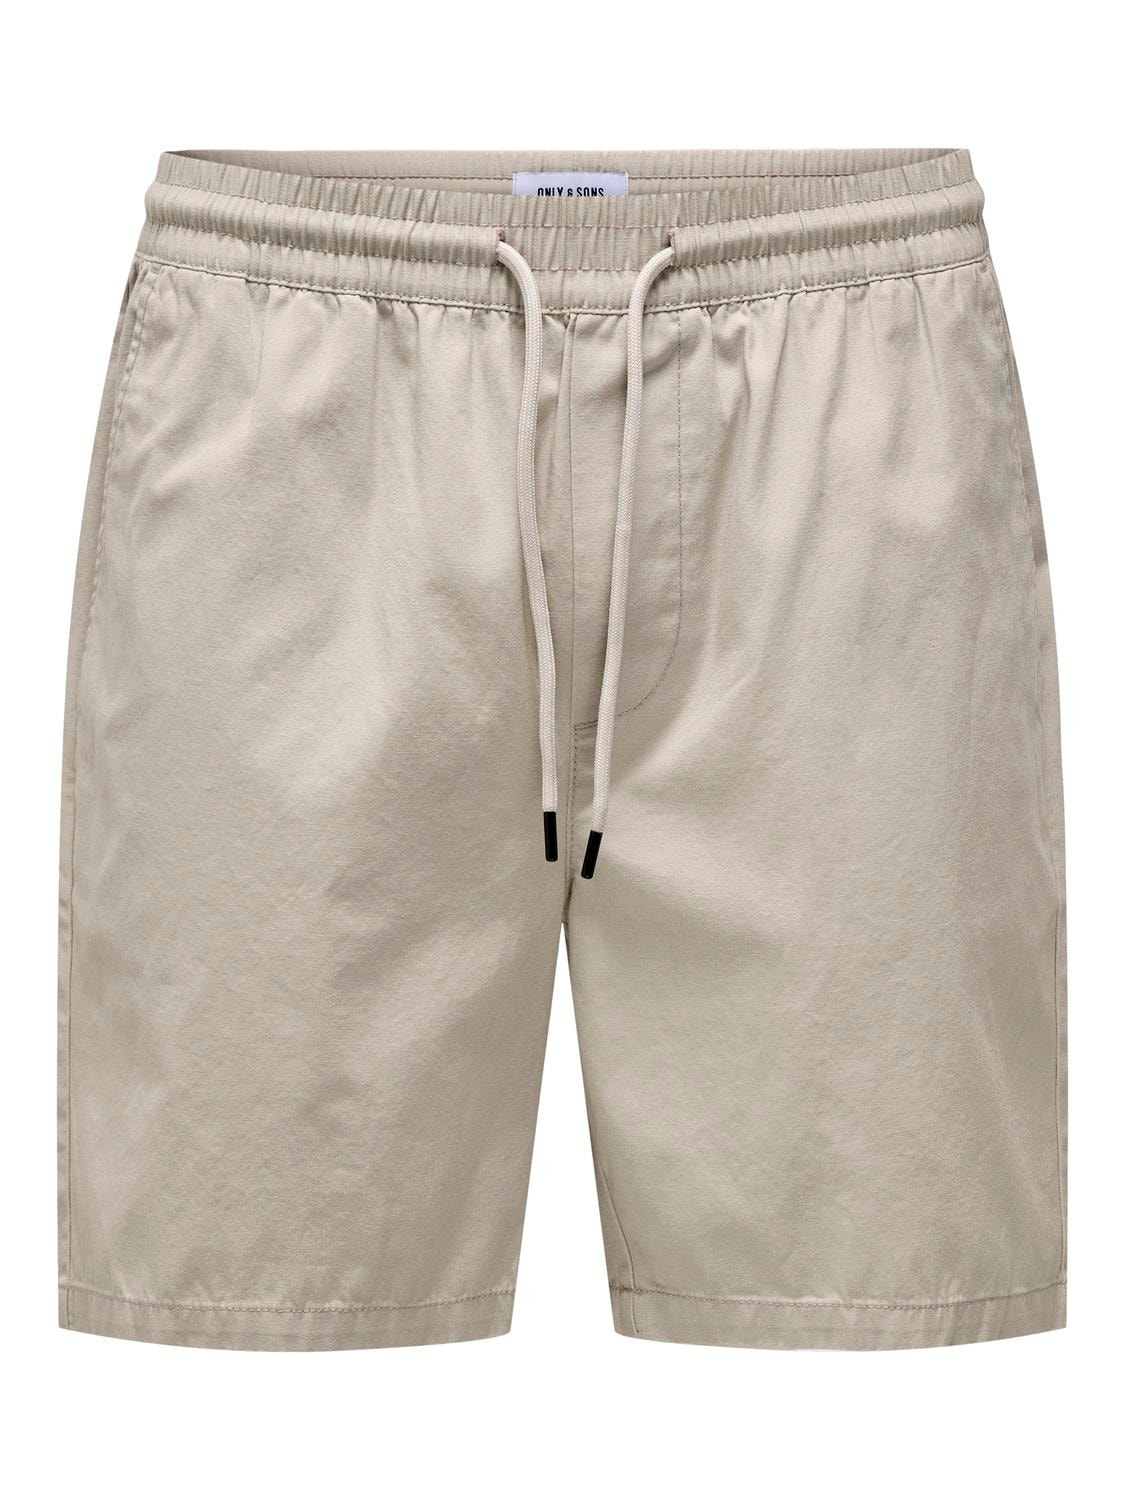 ONLY & SONS Normal geschnitten Shorts -Silver Lining - 22027949